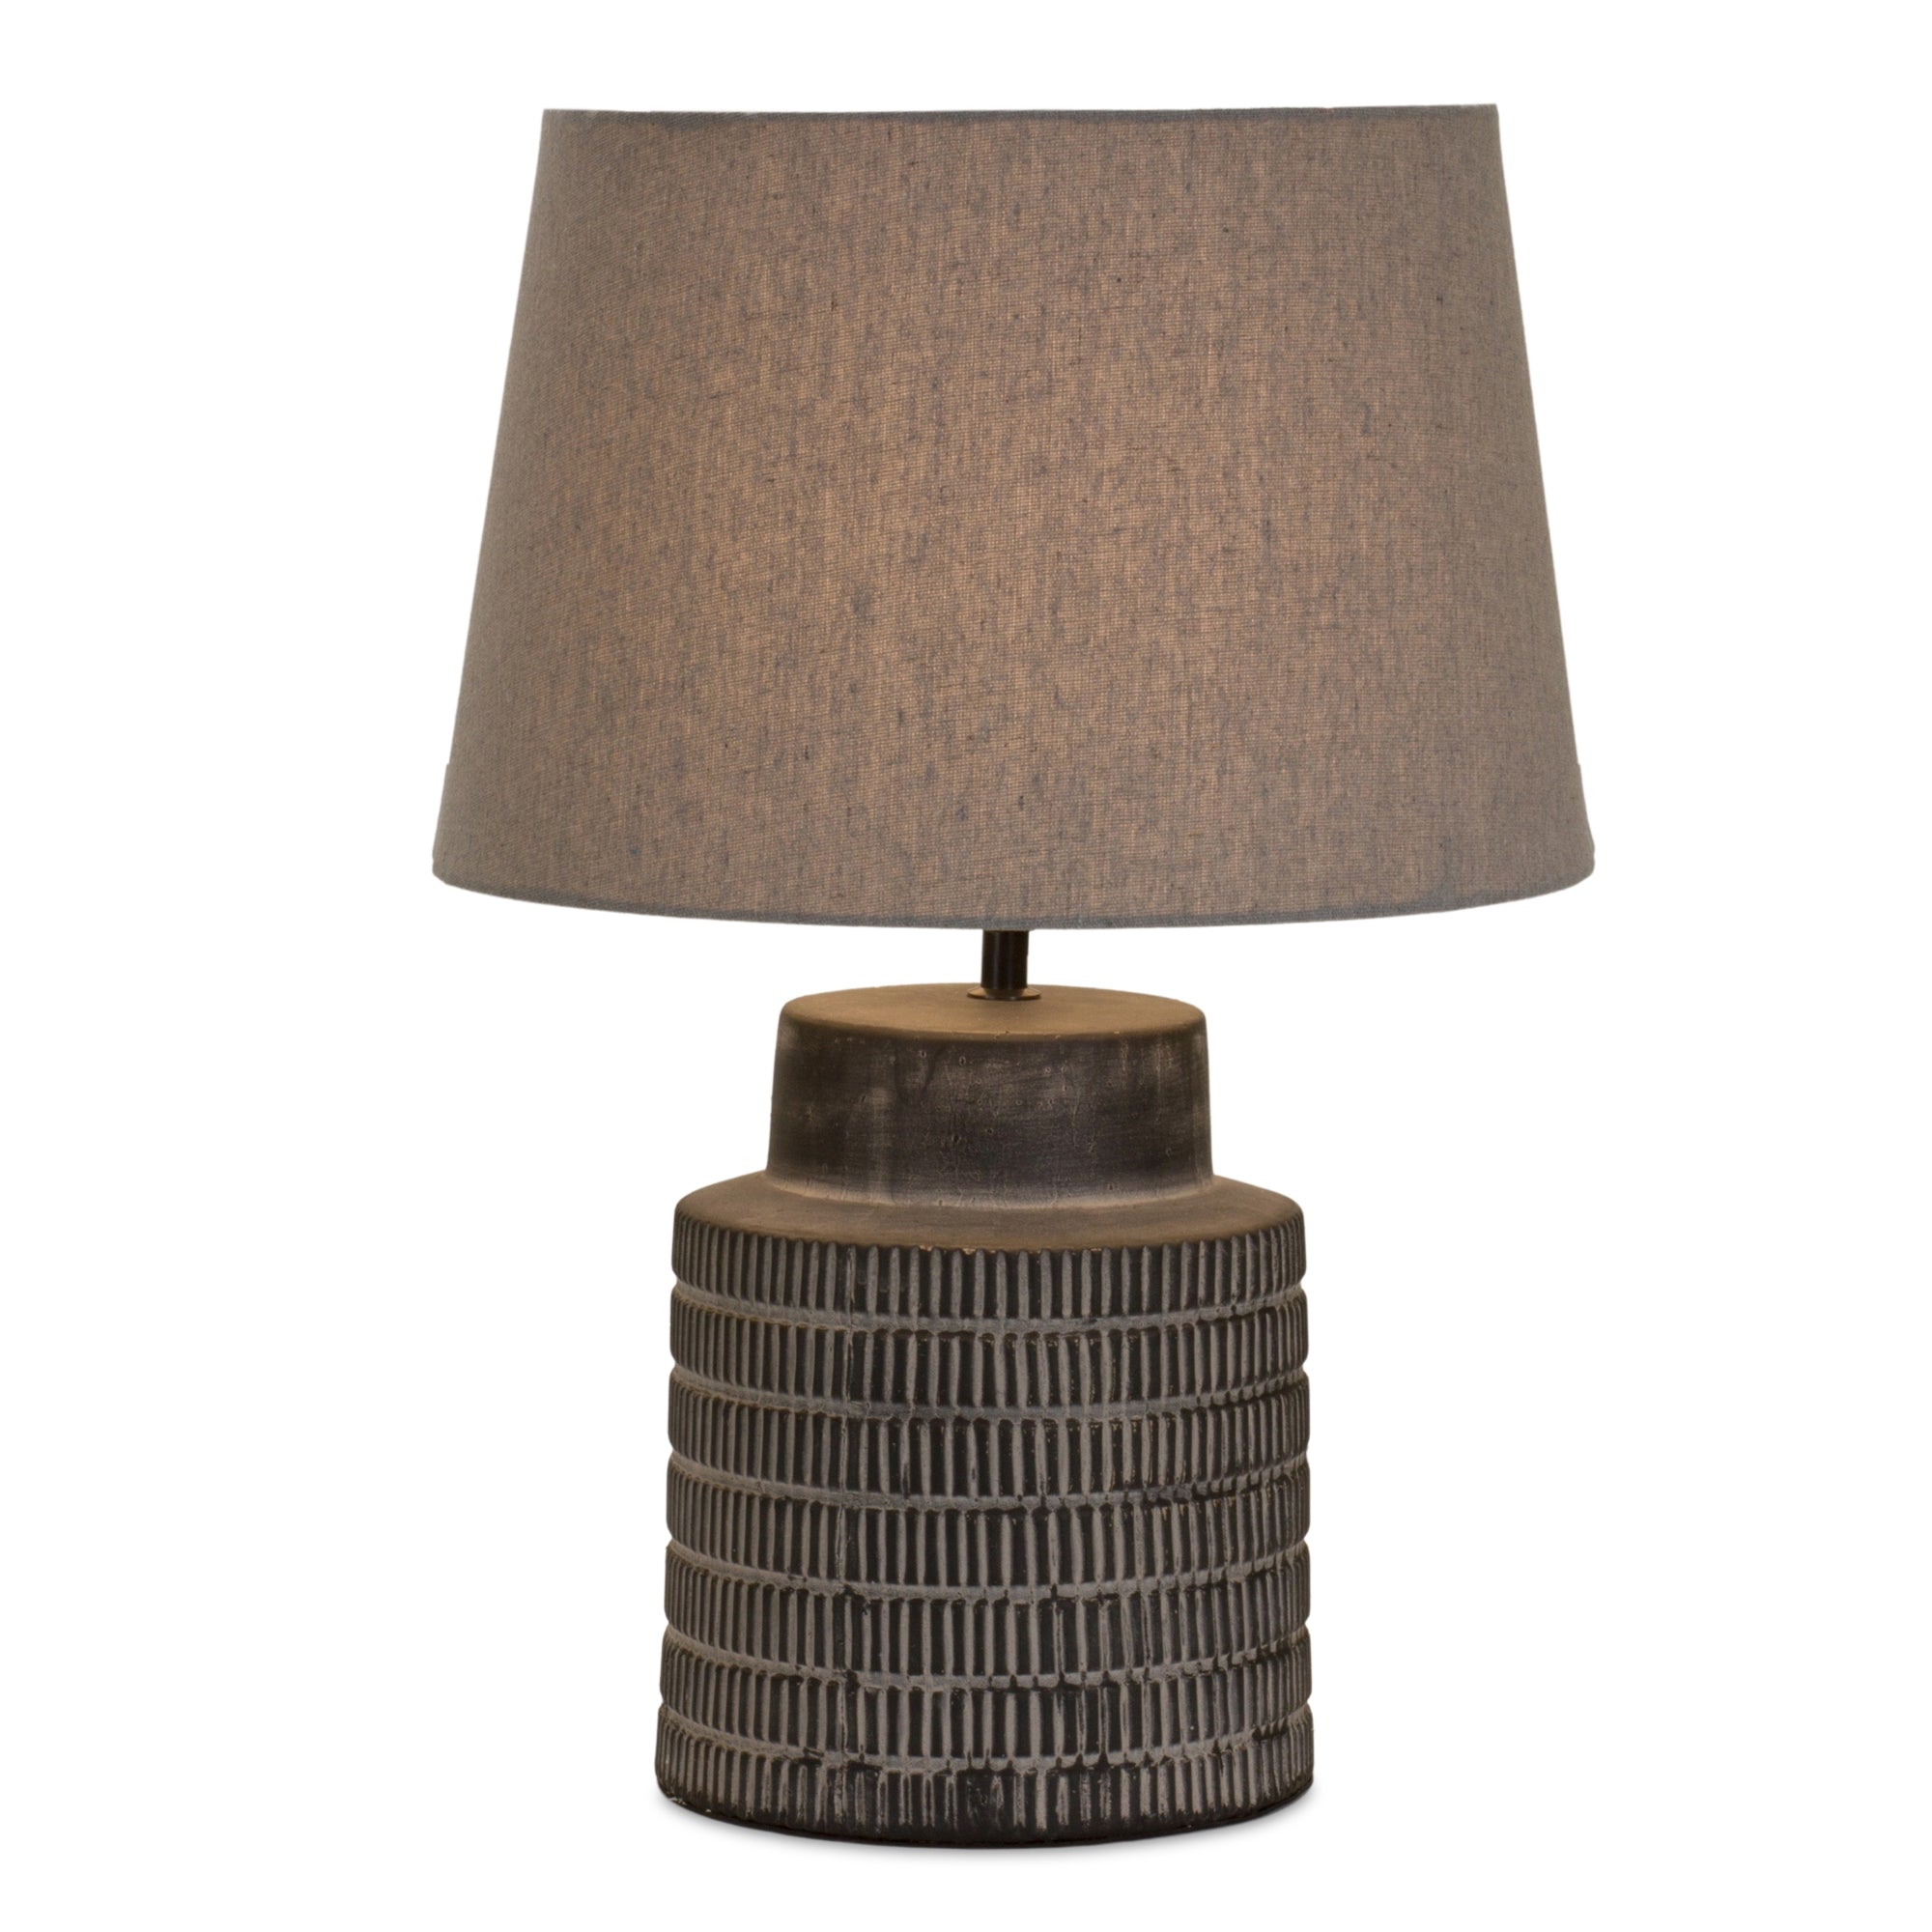 Etched Terra Cotta Table Lamp 21" - Pier 1